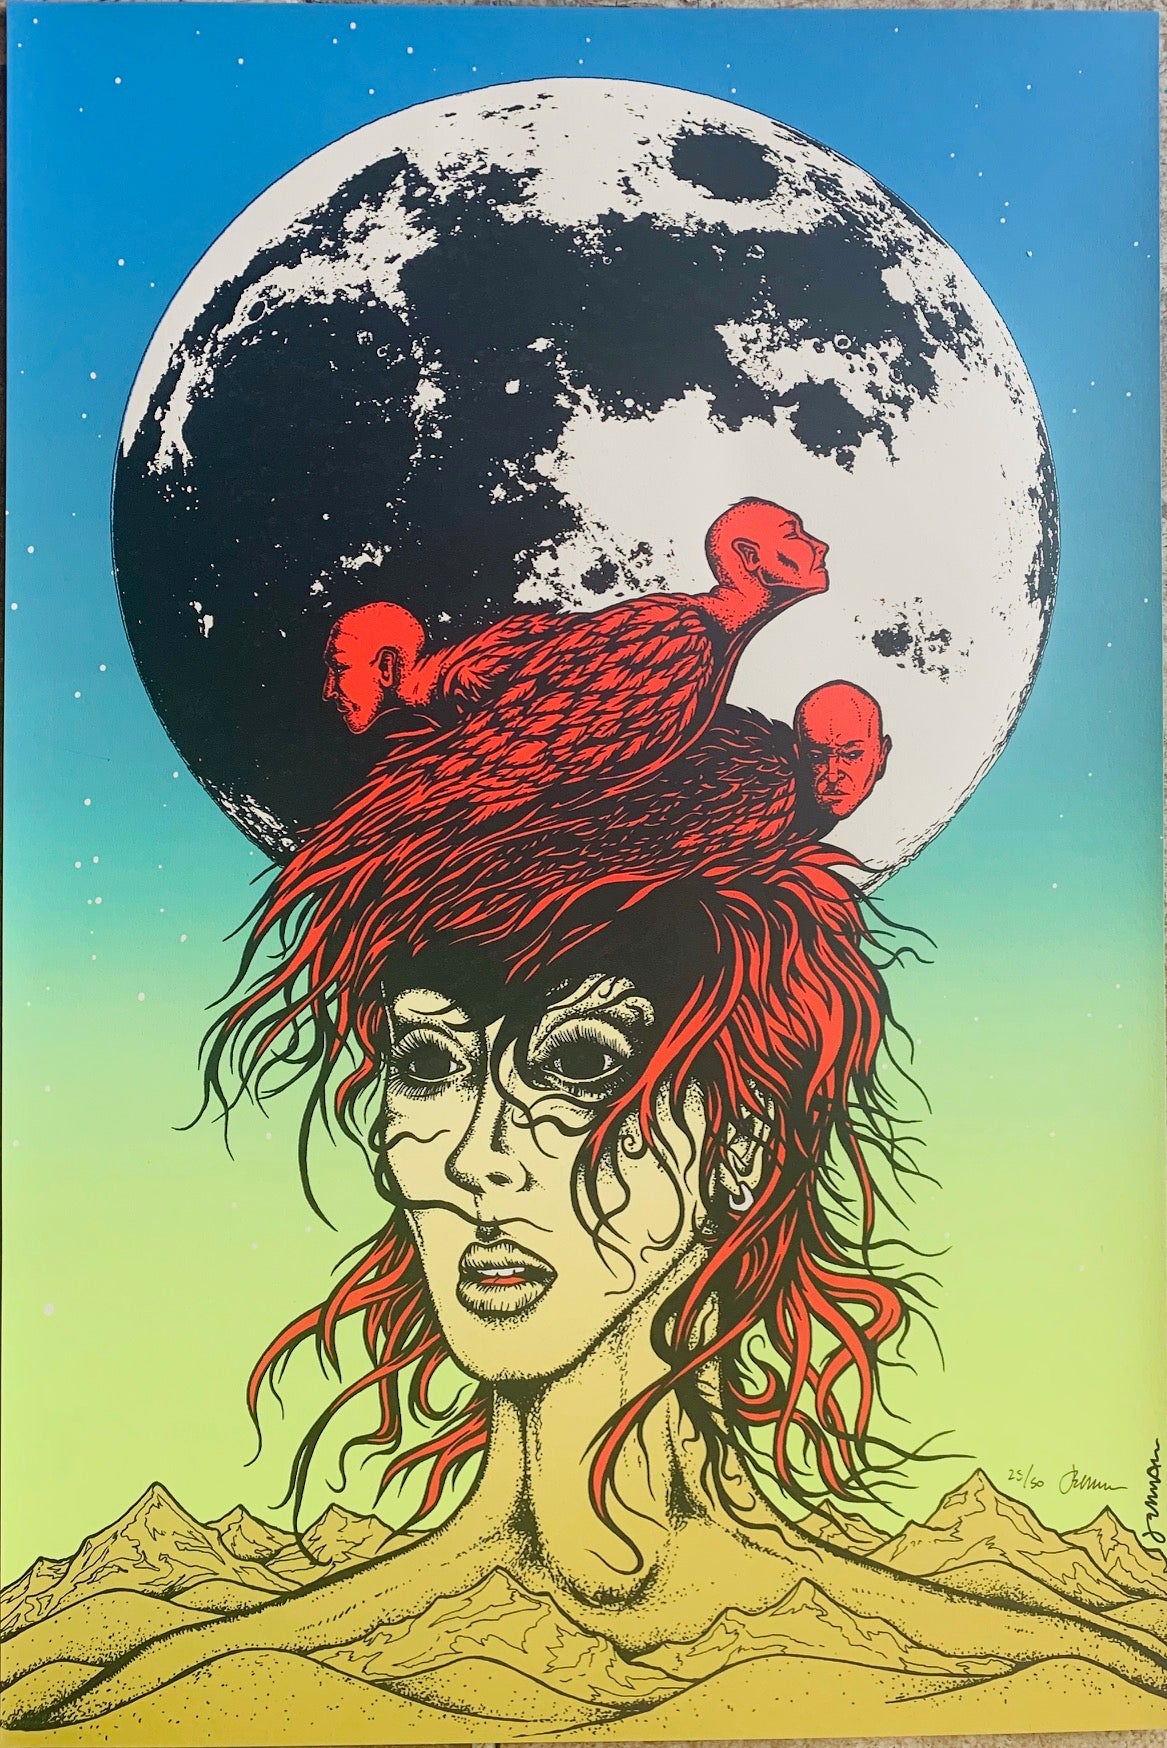 WEEN Moon and face graphic (you were going to look up the name of this art print) 25/50